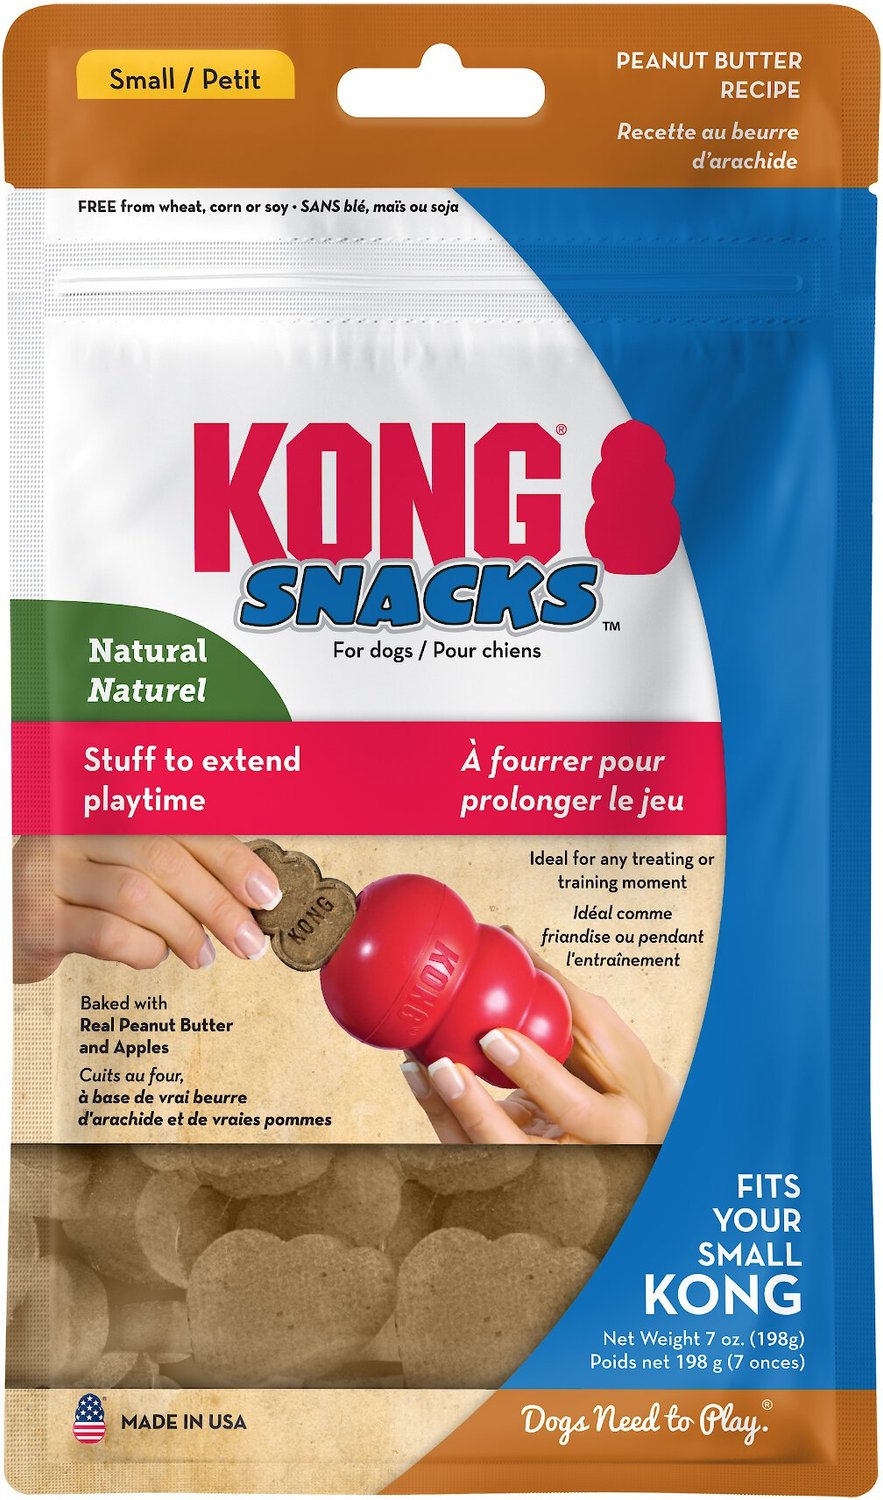 treats to put in a kong